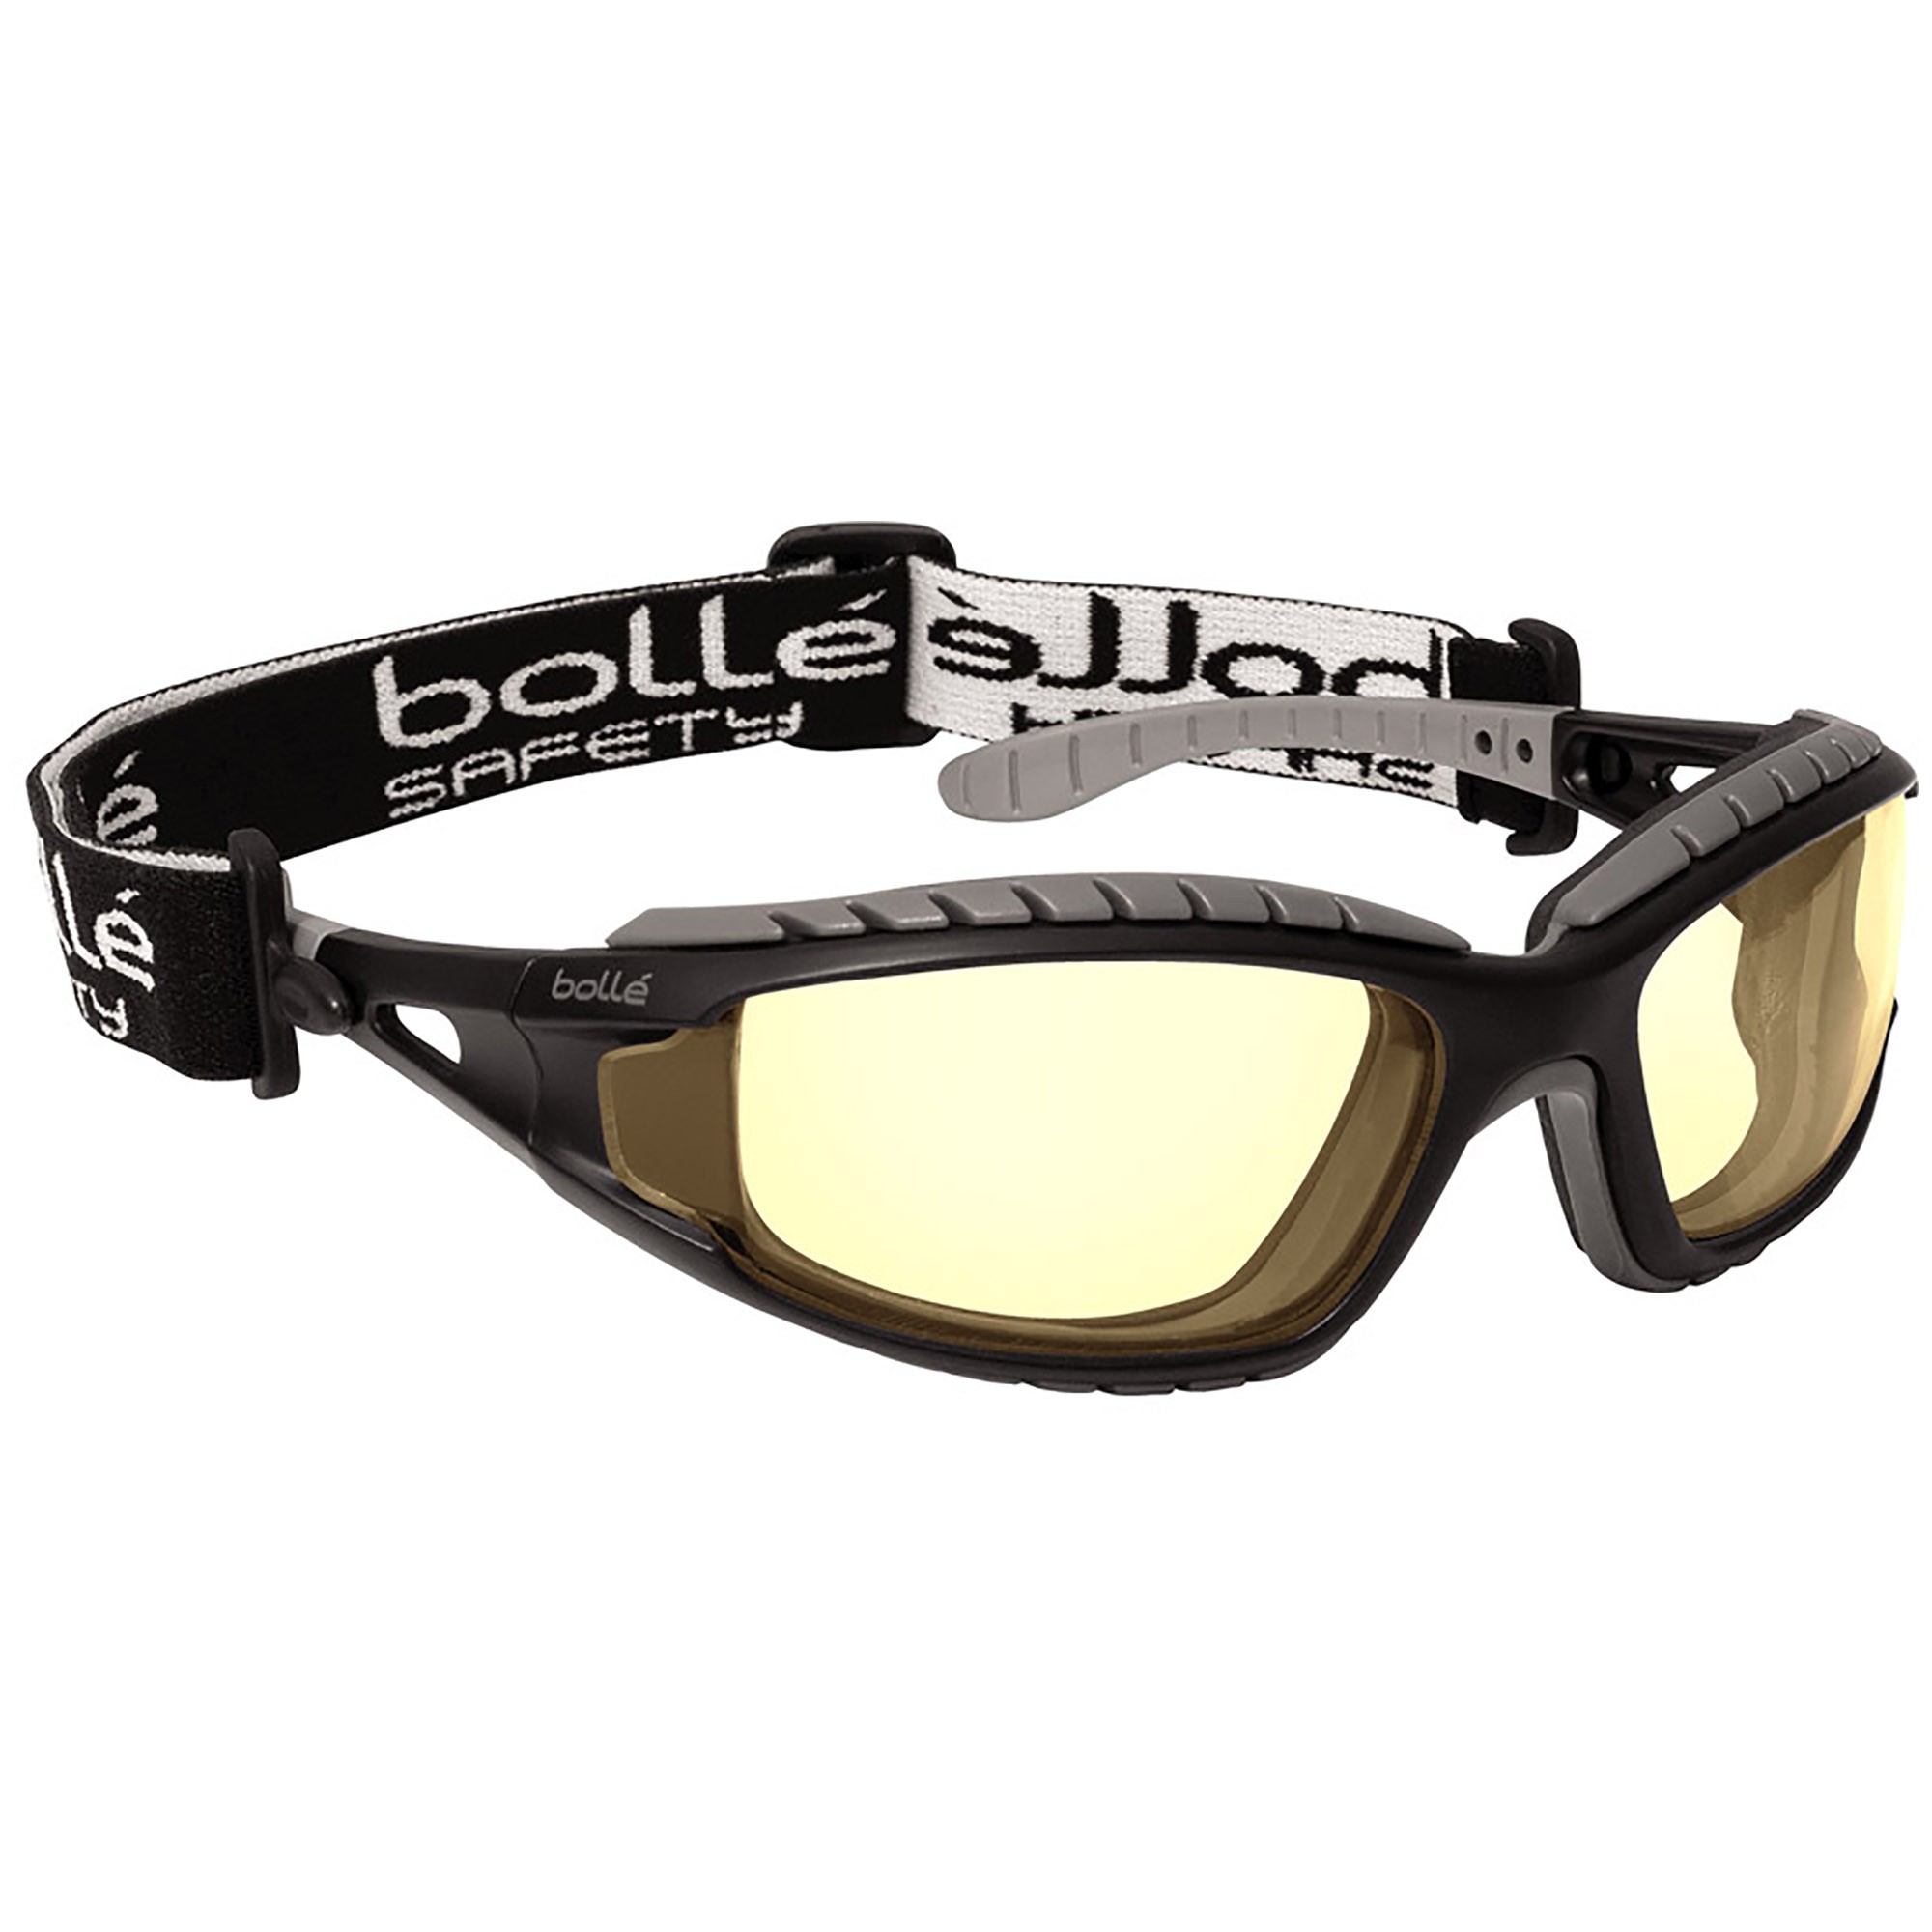 Bolle 40087 Tracker Safety Glasses Goggles Black Grey Temples Yellow Anti Fog Lens